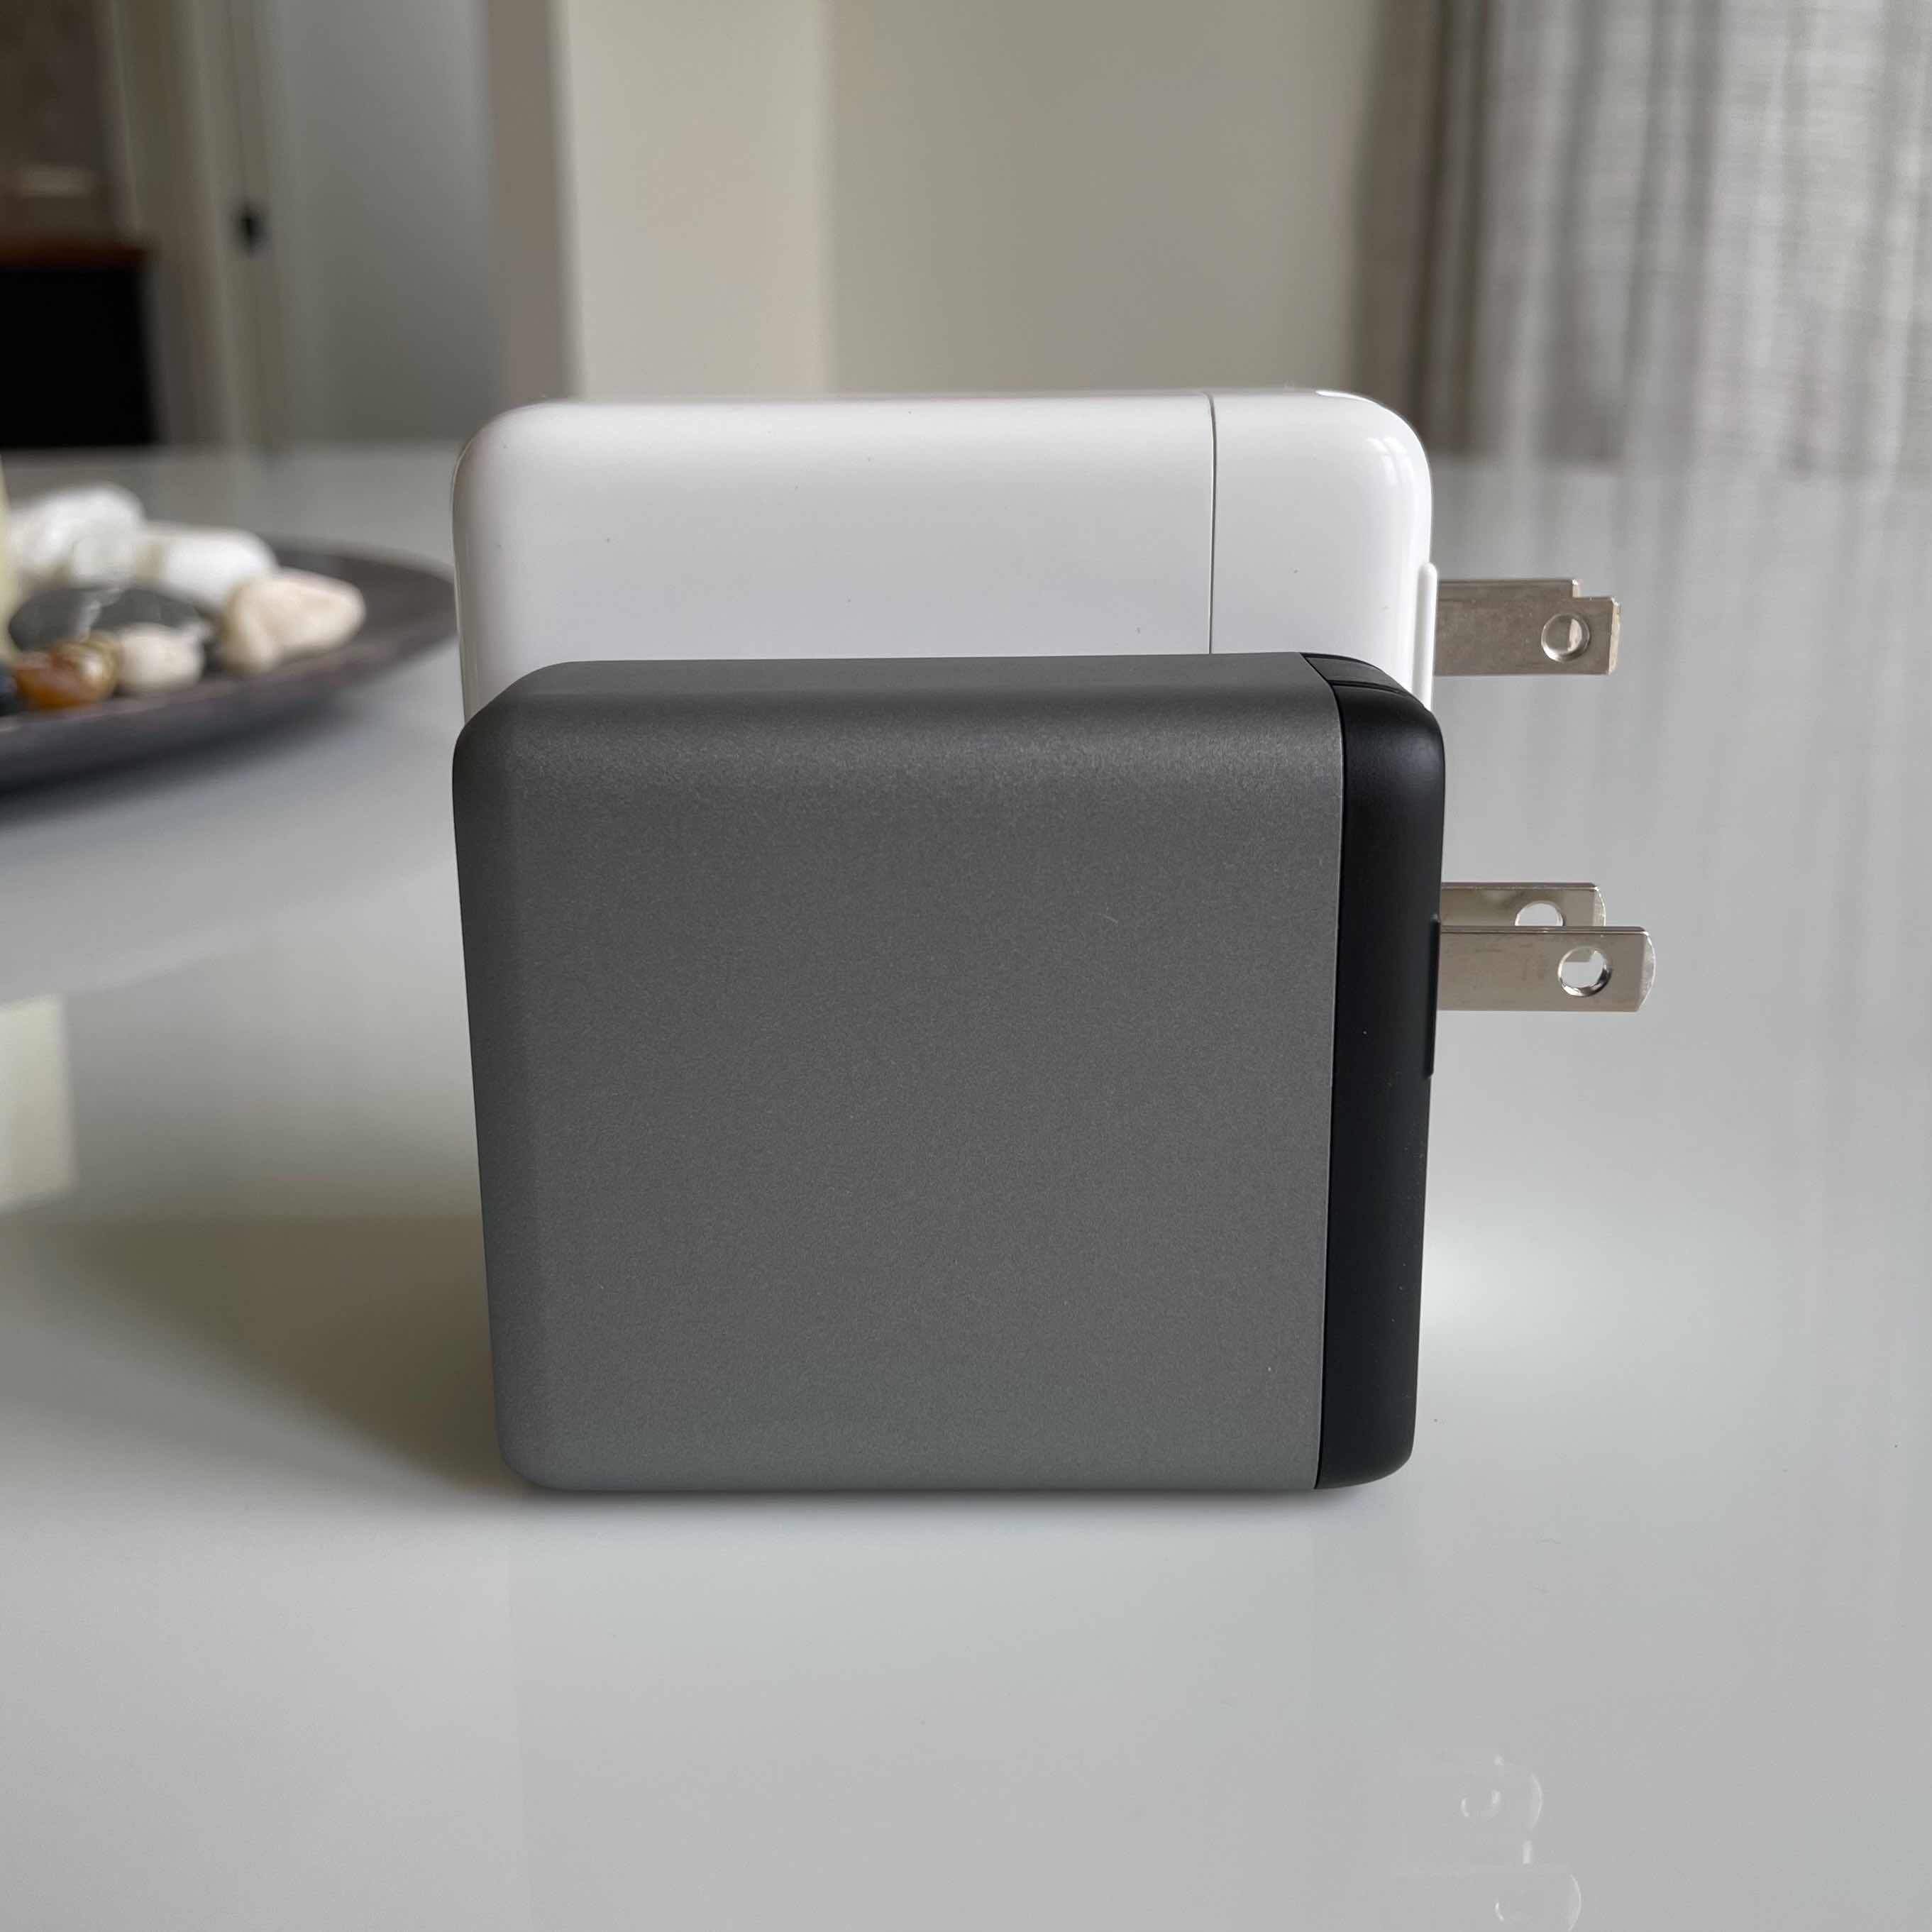 Satechi GaN USB-C chargers size comparison - 100W Wall Charger